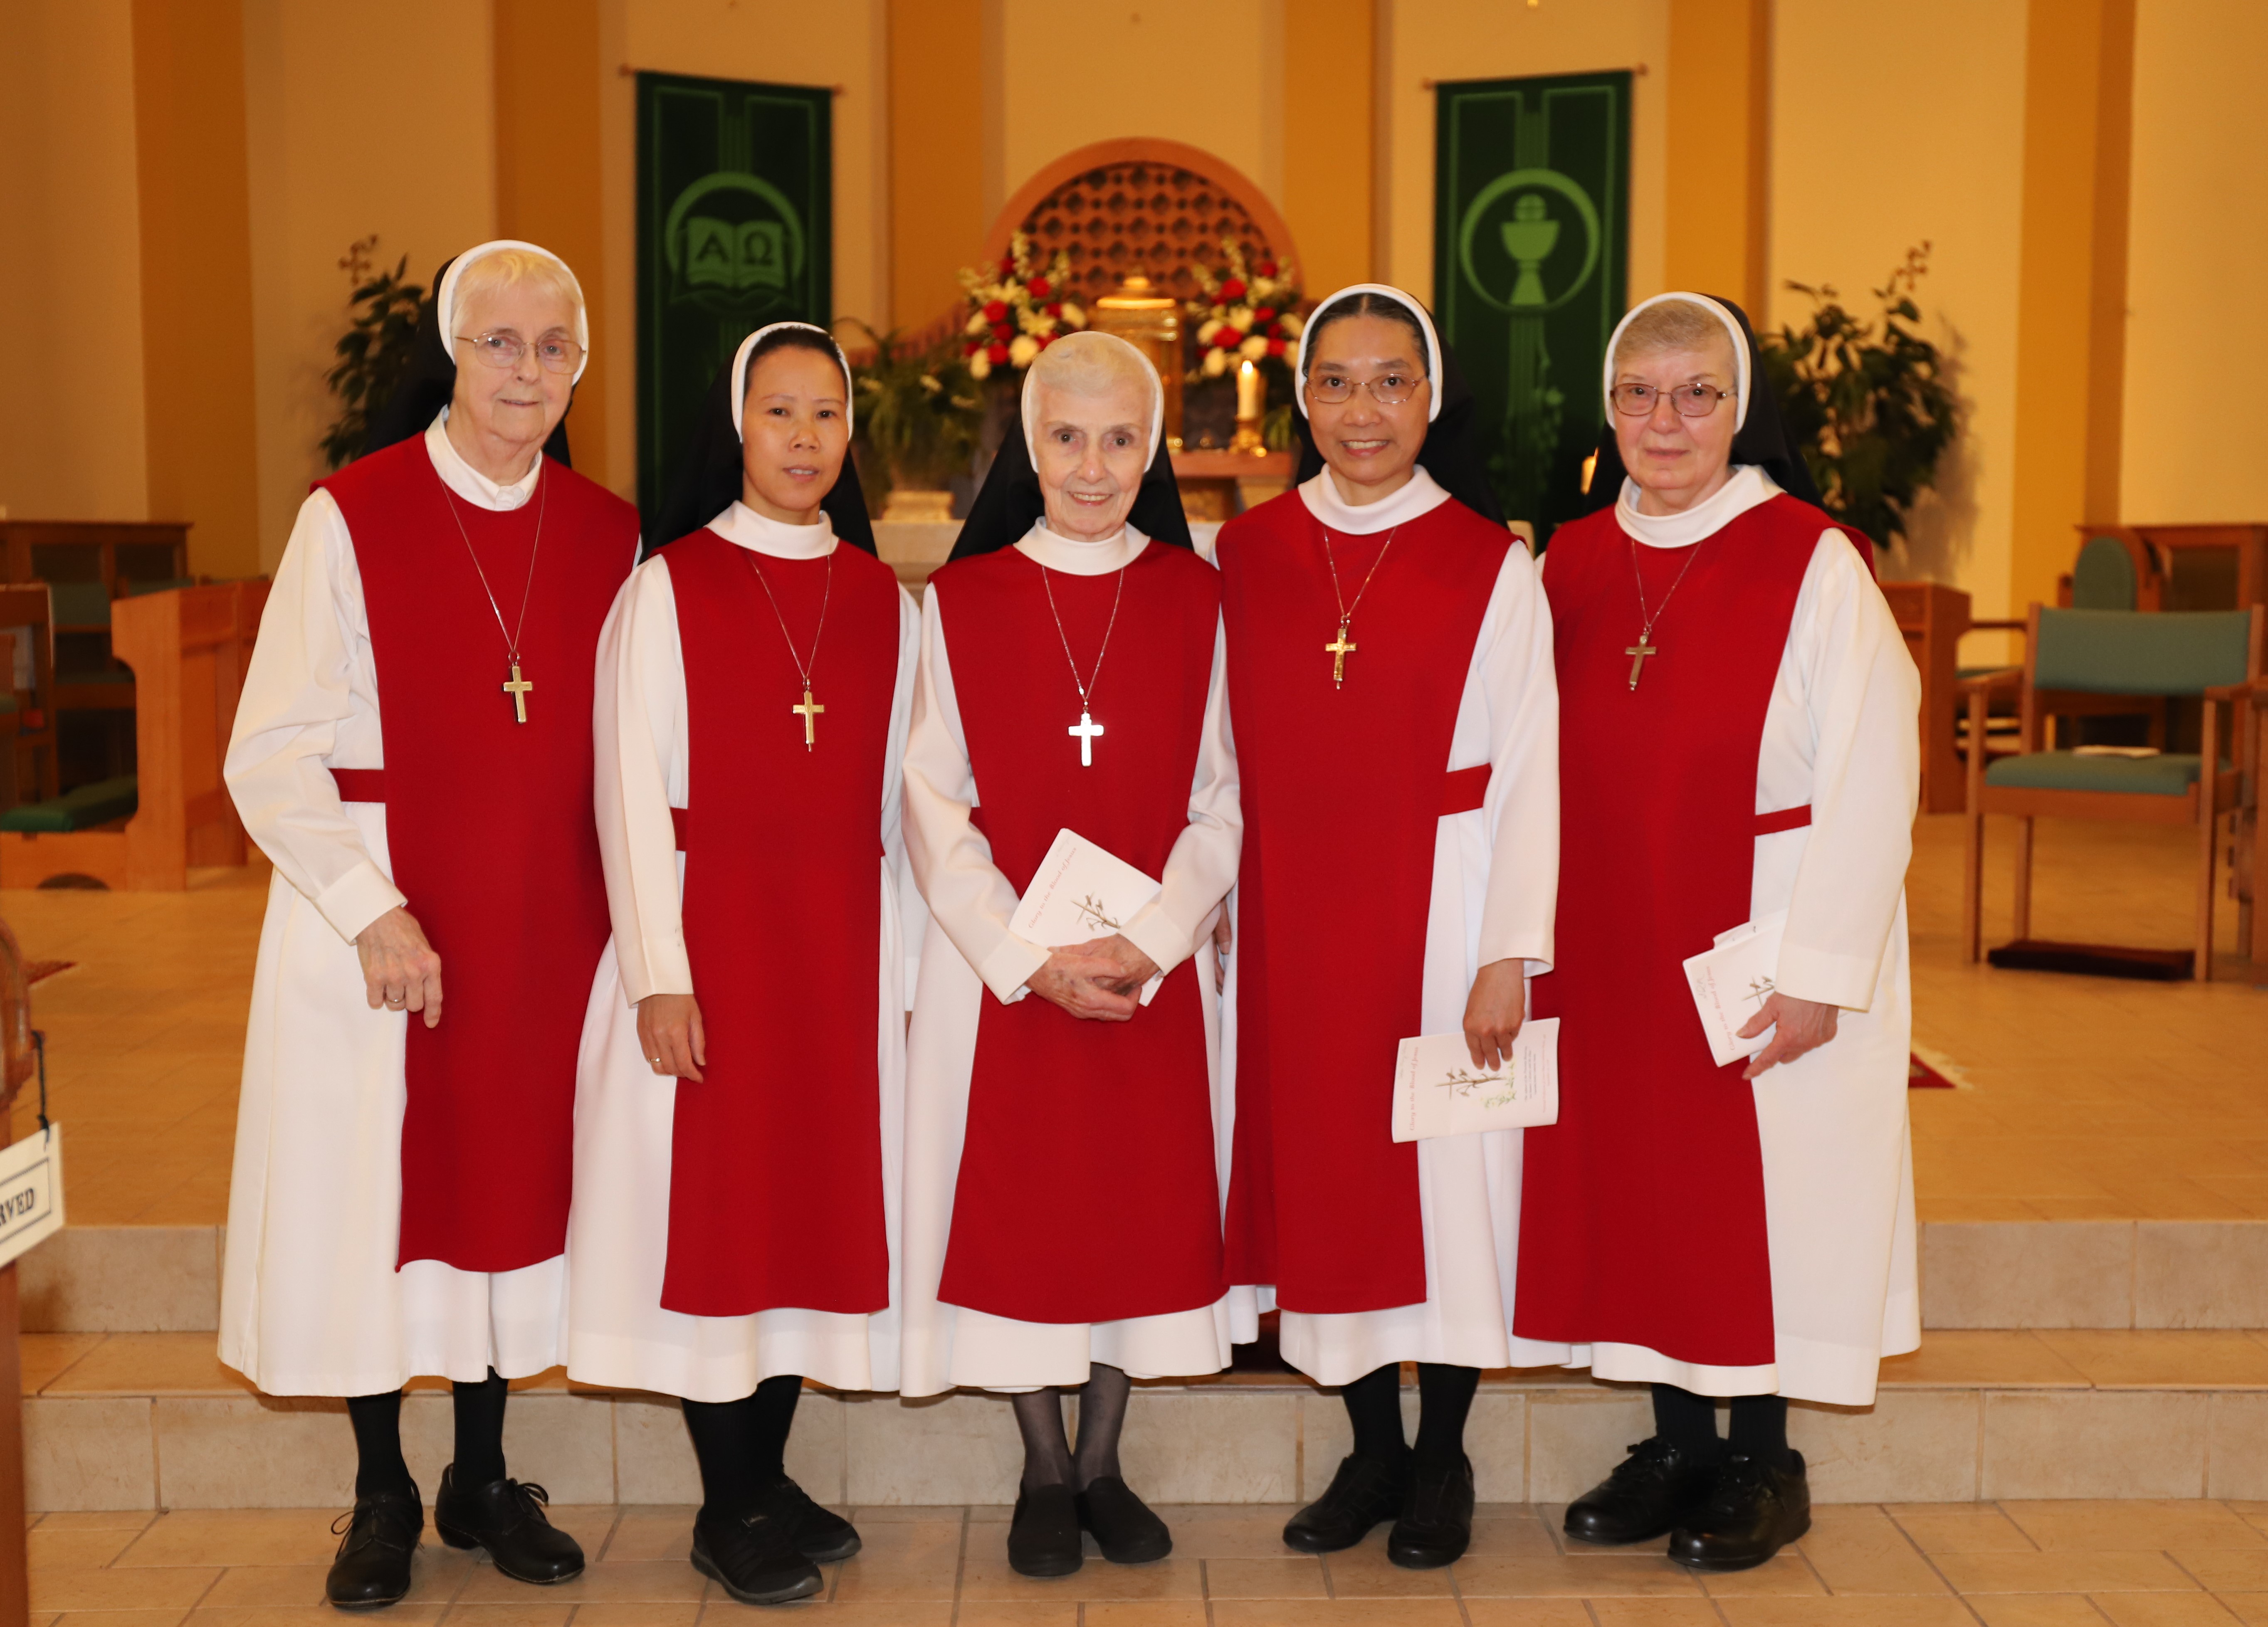 Sisters of the Precious Blood